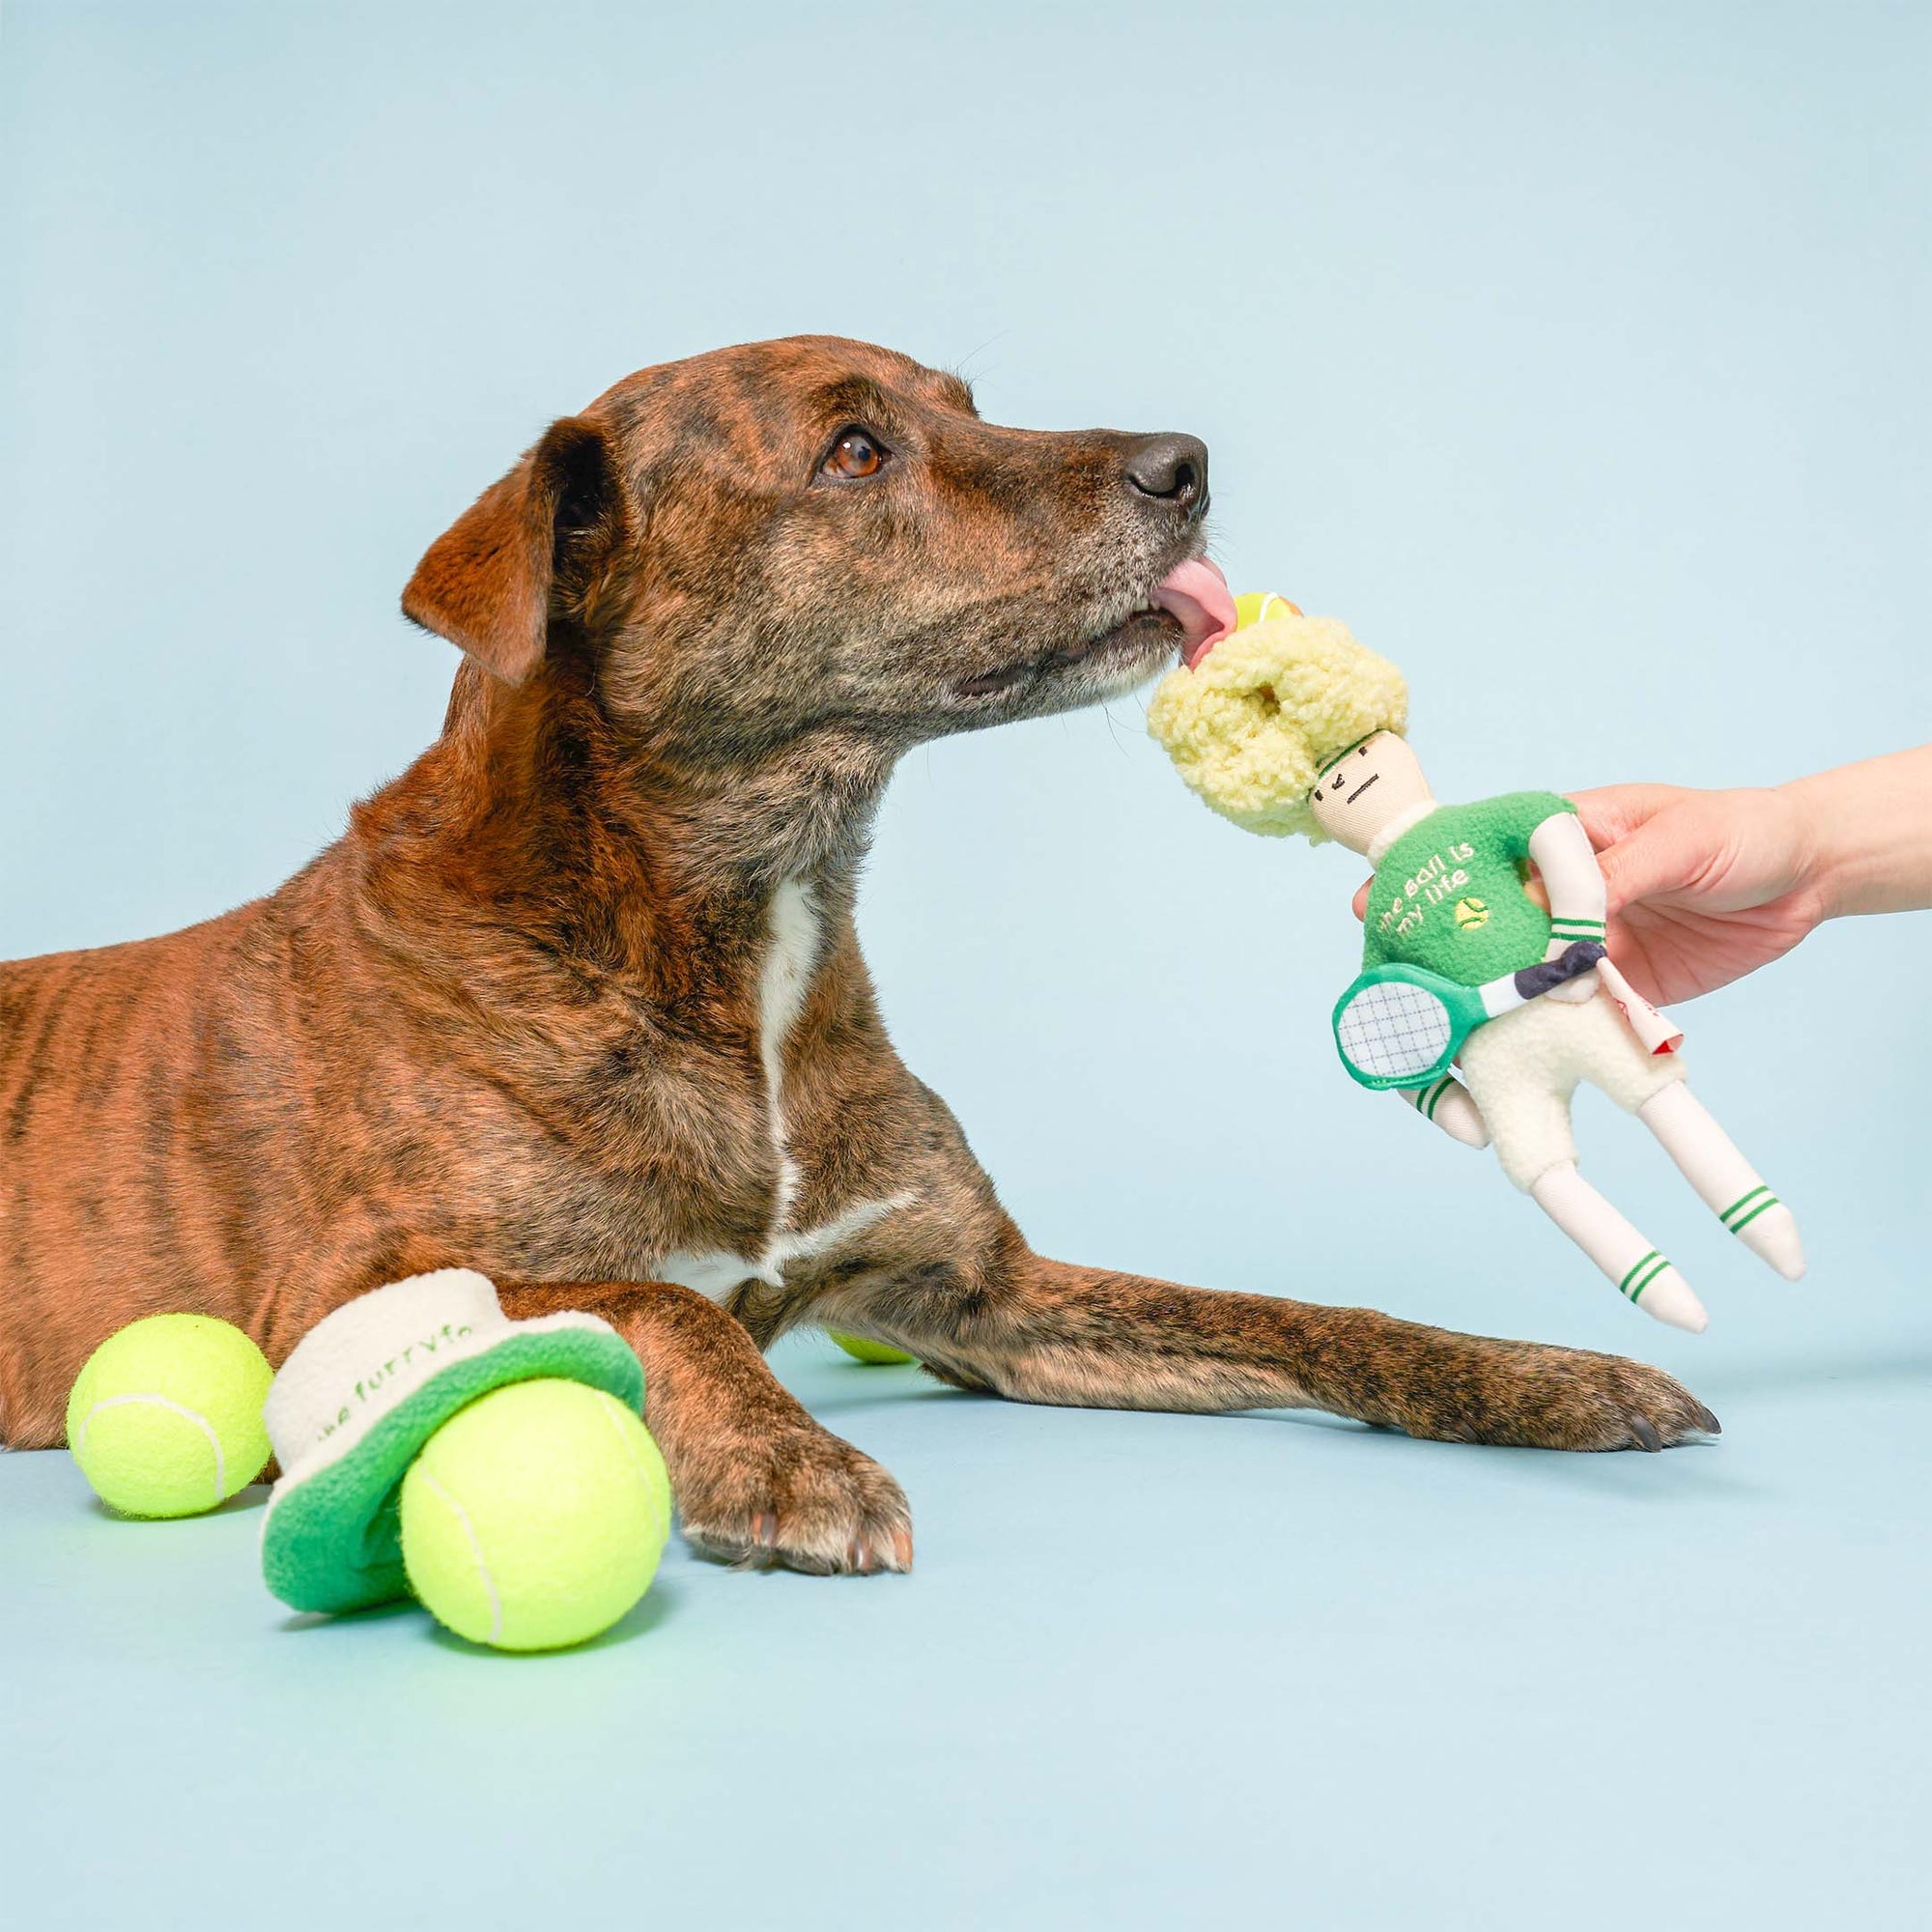 The brindle dog is lying down on a light blue background, playfully biting a plush toy held by a human hand. The toy is styled as a tennis player with a green hat decorated with a tennis ball, a green sweater emblazoned with "the ball is my life," and a white tennis racket. Beside the dog are three plush tennis balls labeled "the furryfolks" on the white bands, echoing the toy theme. The overall setting is playful and colorful.